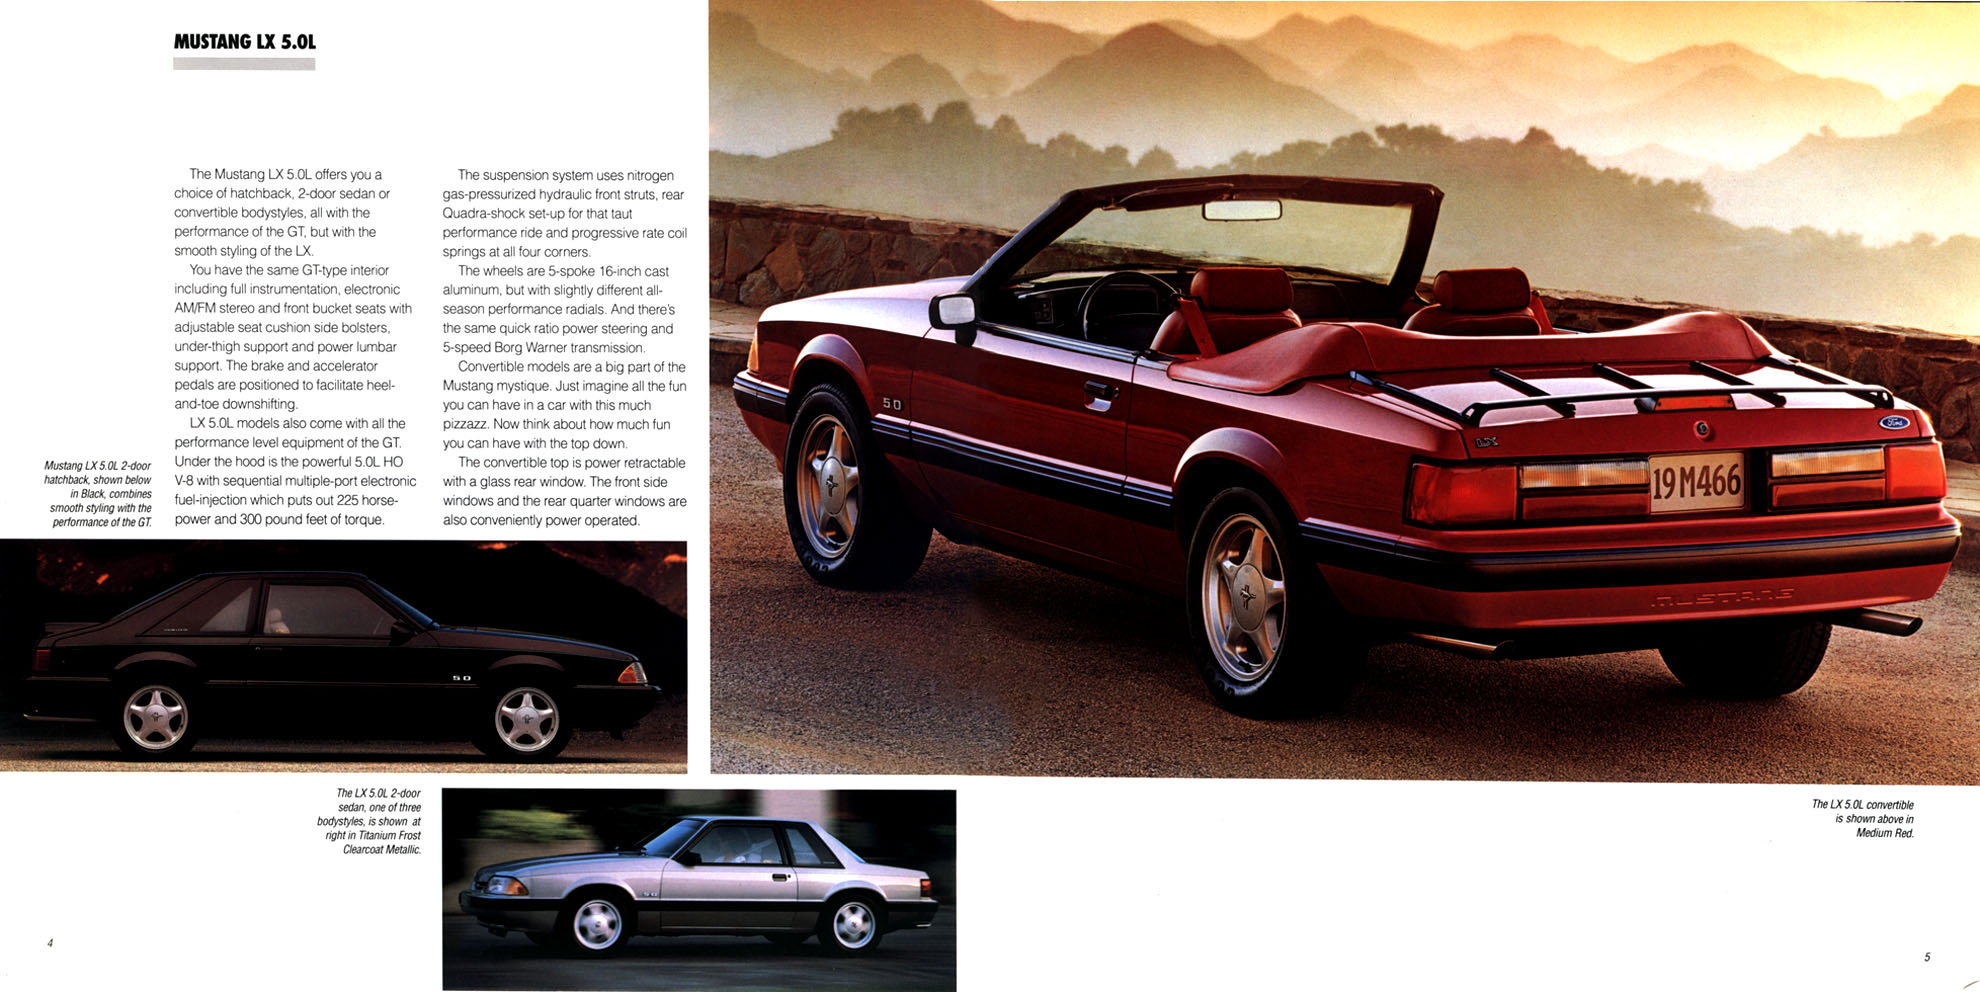 1991_Ford_Mustang-04-05